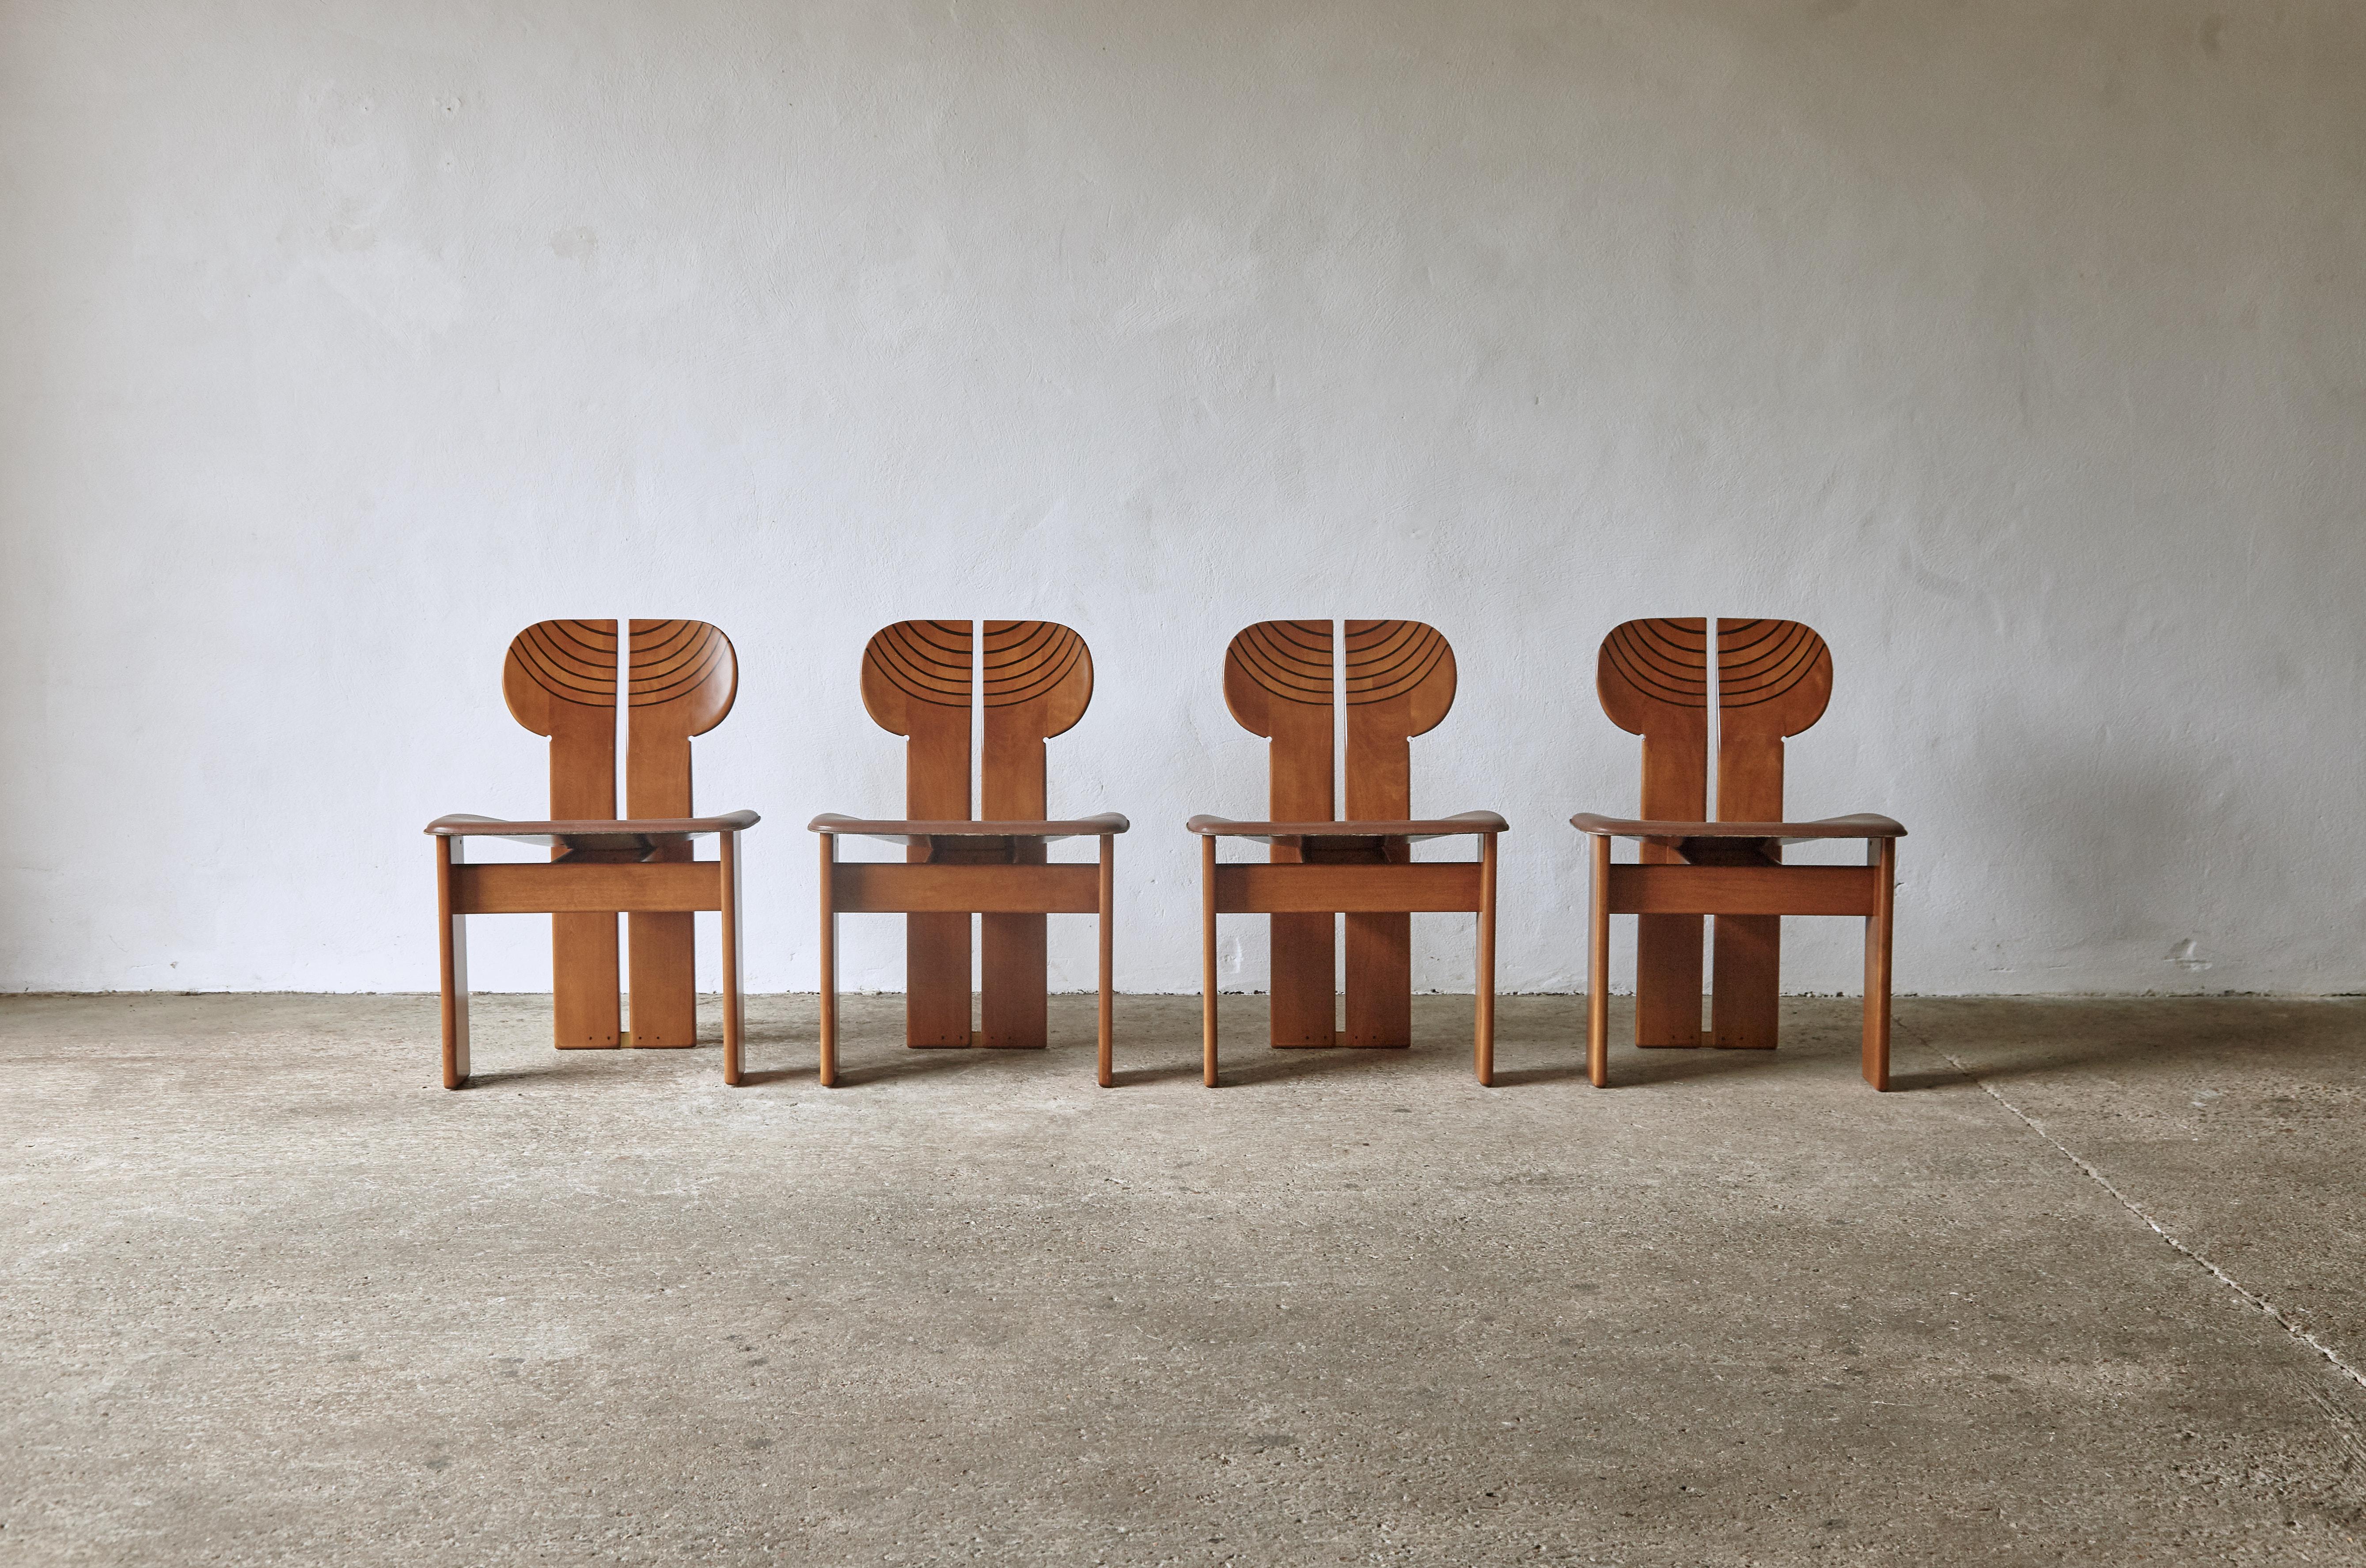 A superb set of four Africa chairs designed by Afra & Tobia Scarpa in the 1970s, and produced by Maxalto, Italy. Walnut, burl, black leather and brass. Good original condition with minor age related signs of use and wear. The original leather seats